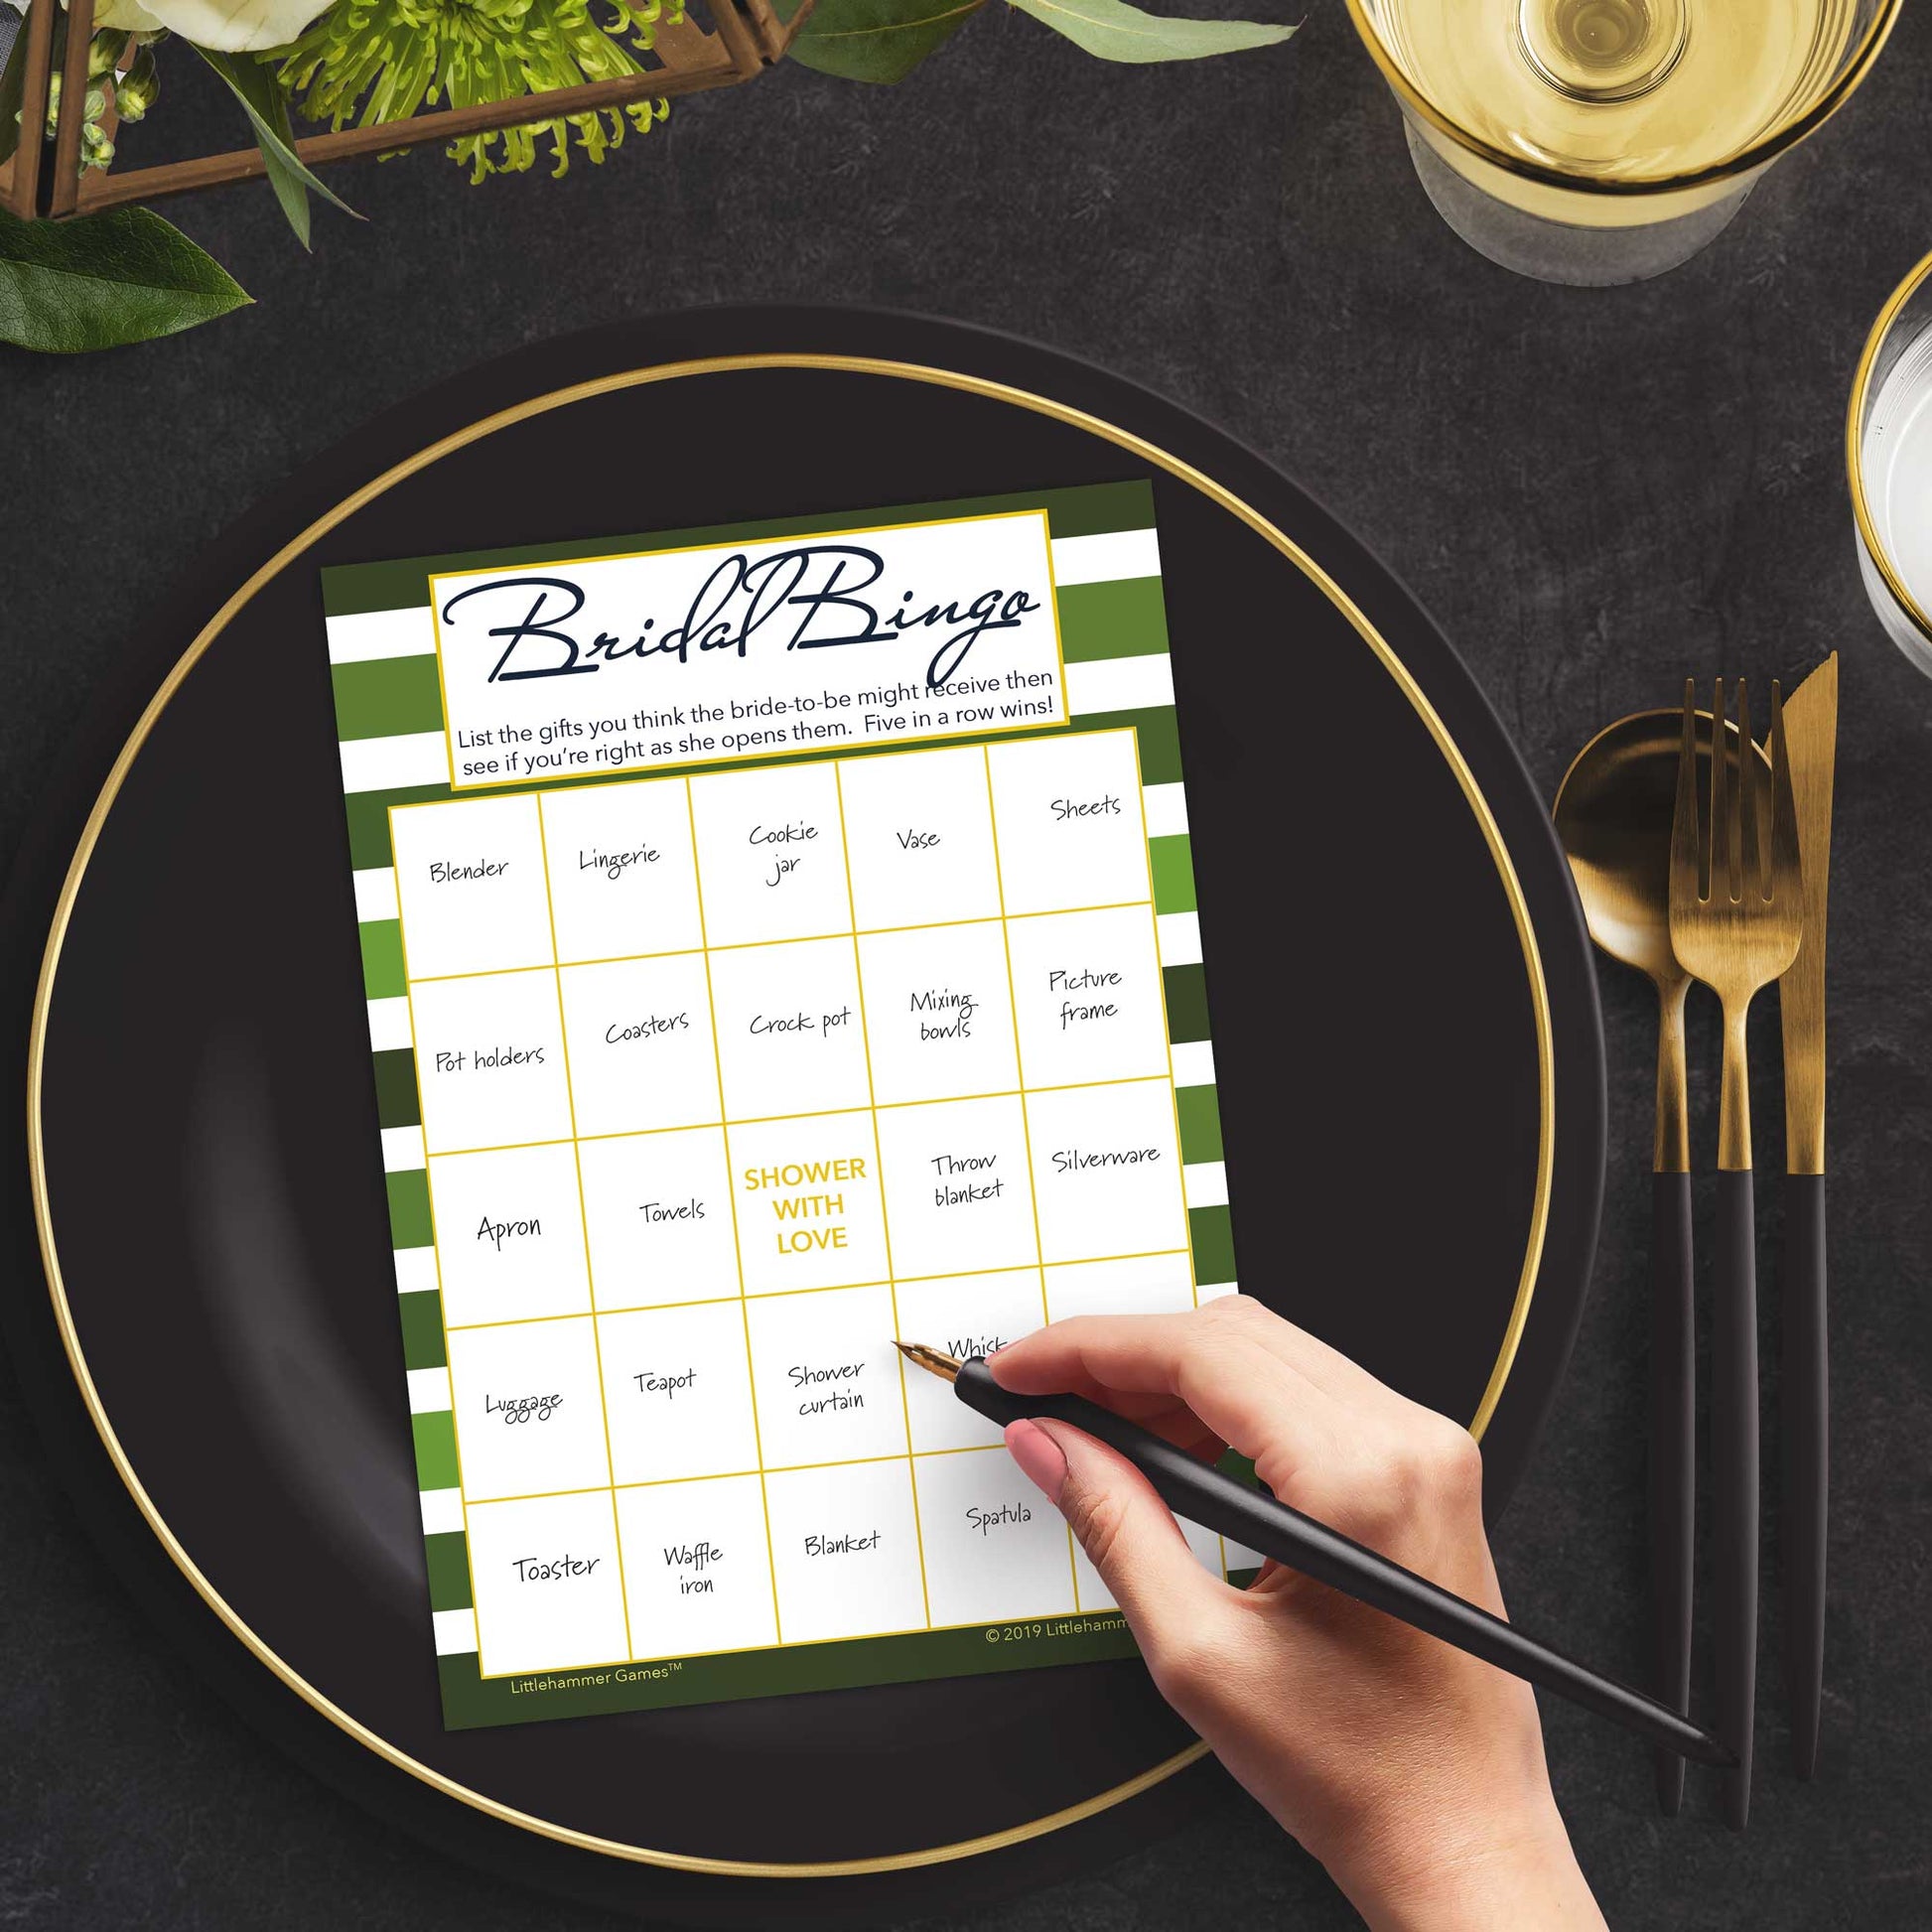 Woman with a pen sitting at a dark place setting with a black and gold plate filling out a green-striped Bridal Gift Bingo card